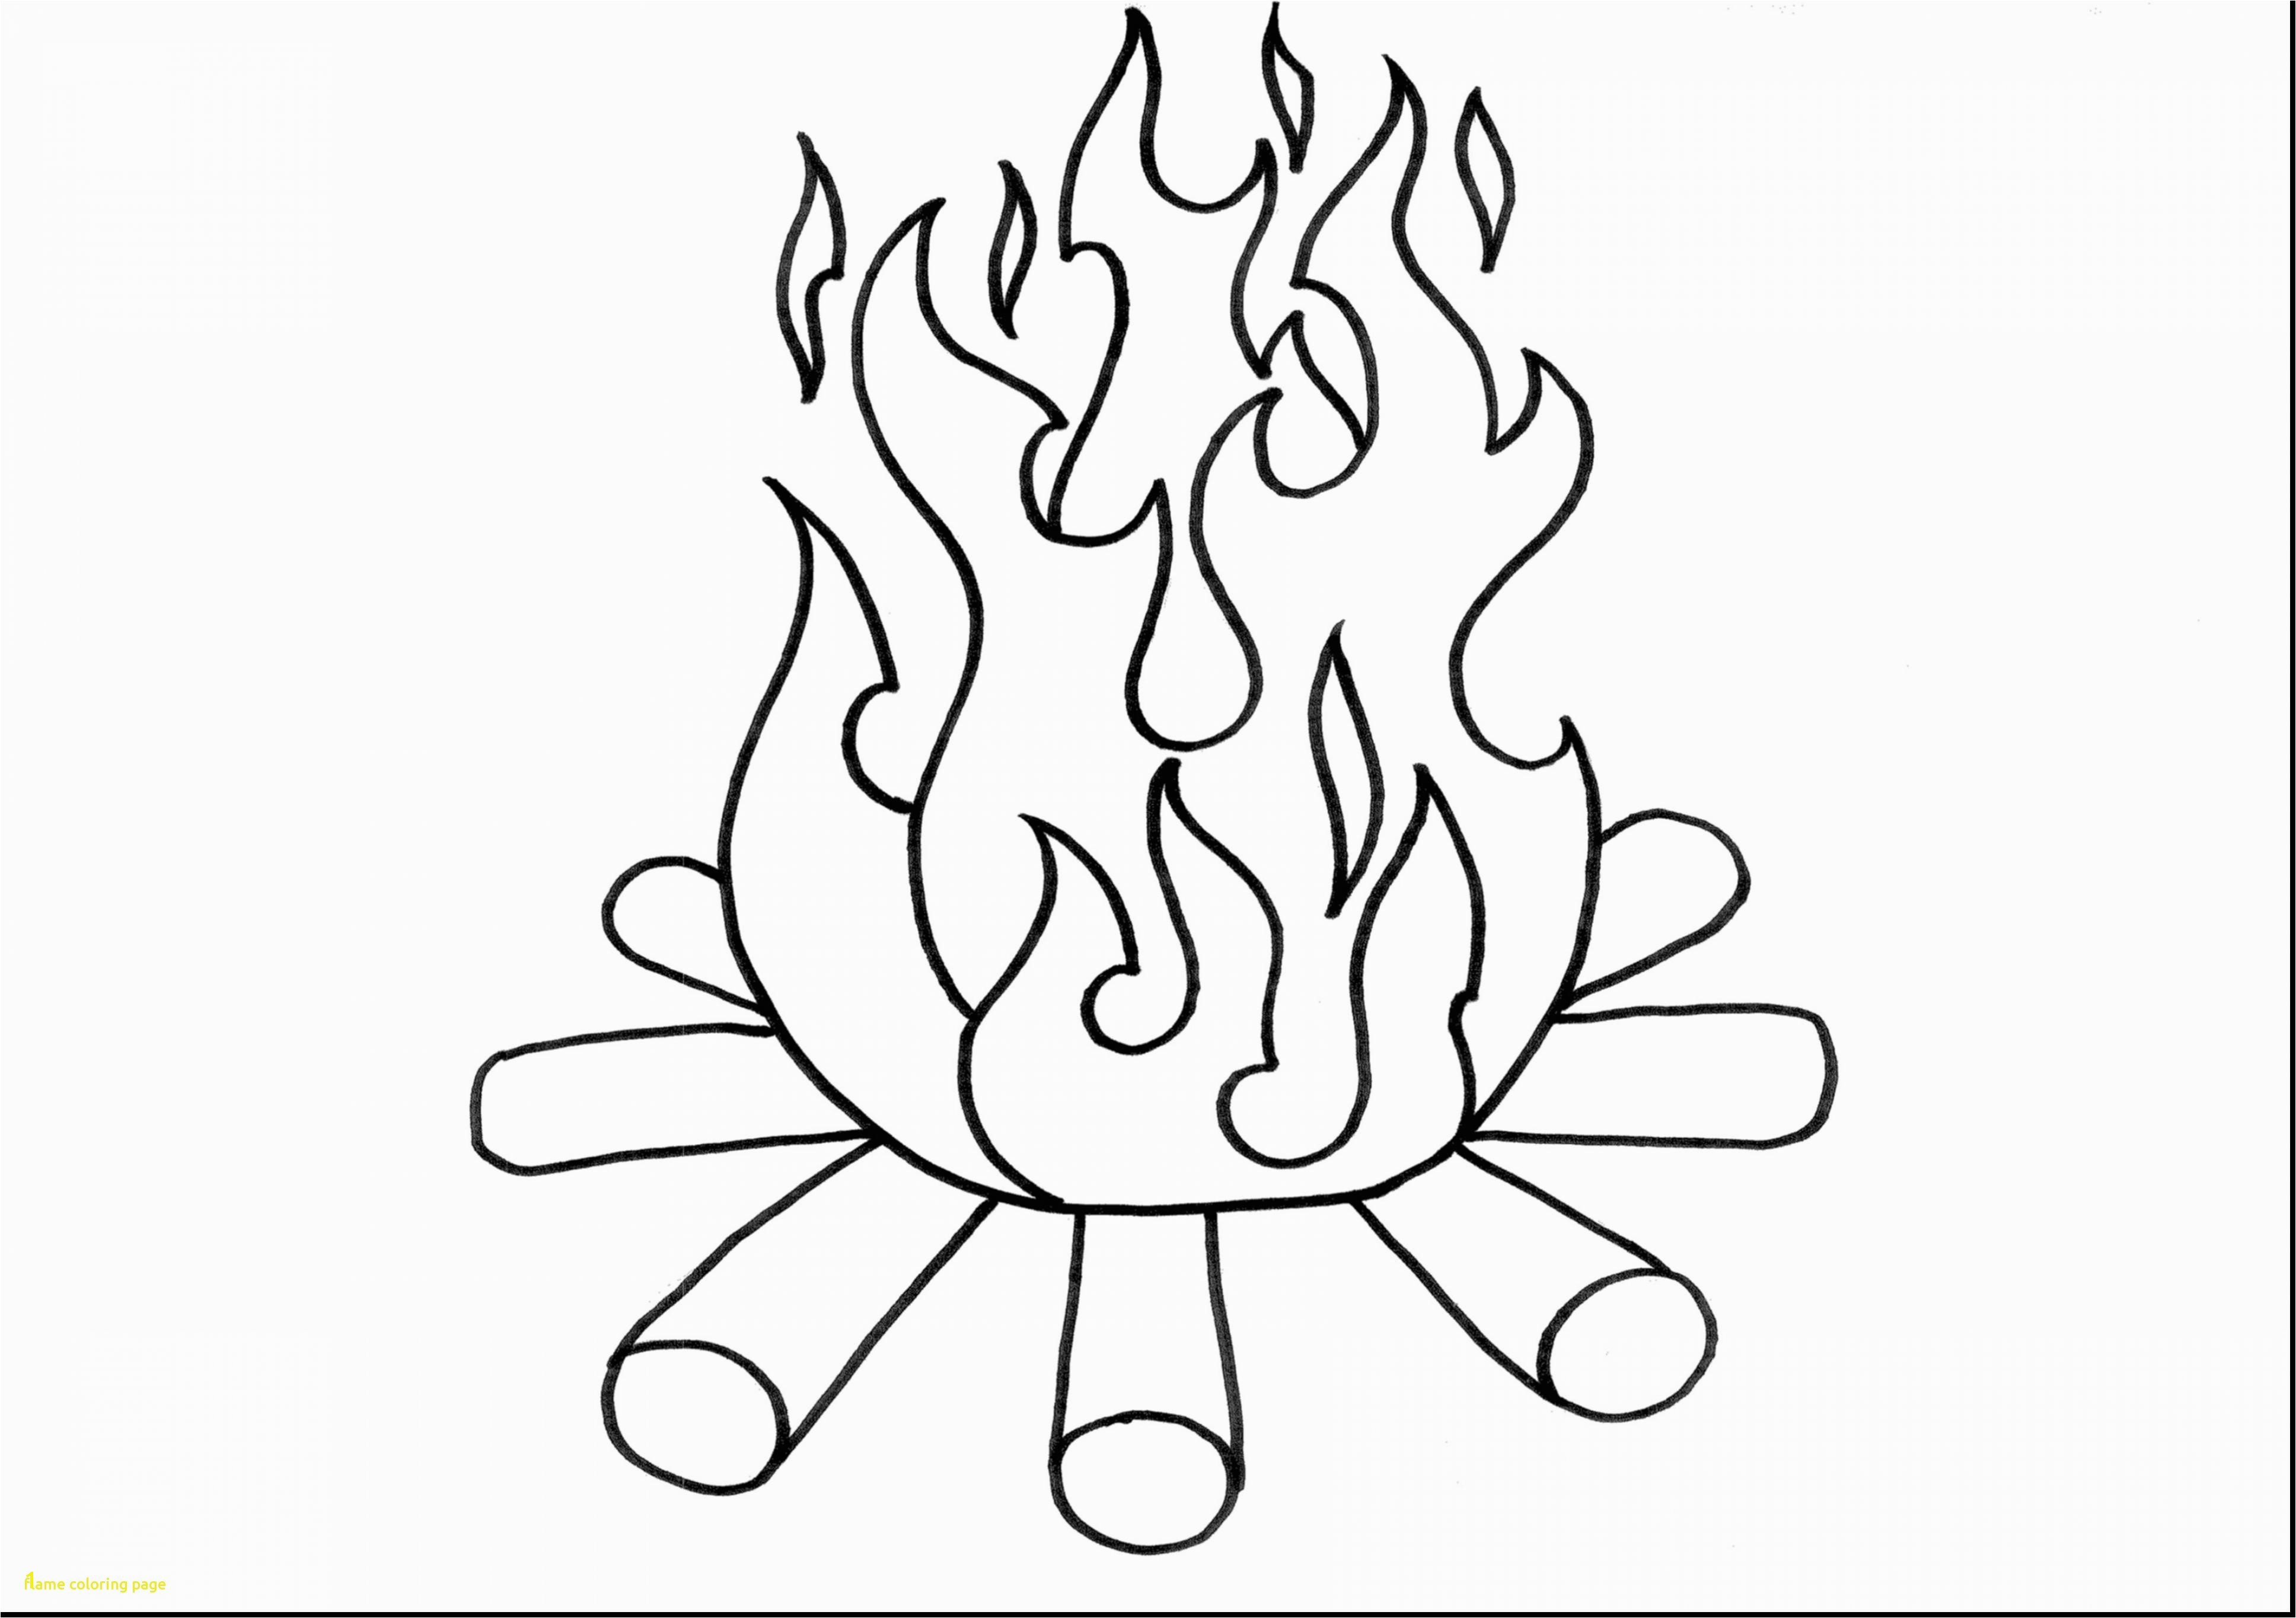 Calgary Flames Coloring Pages Flames Coloring Pages 3